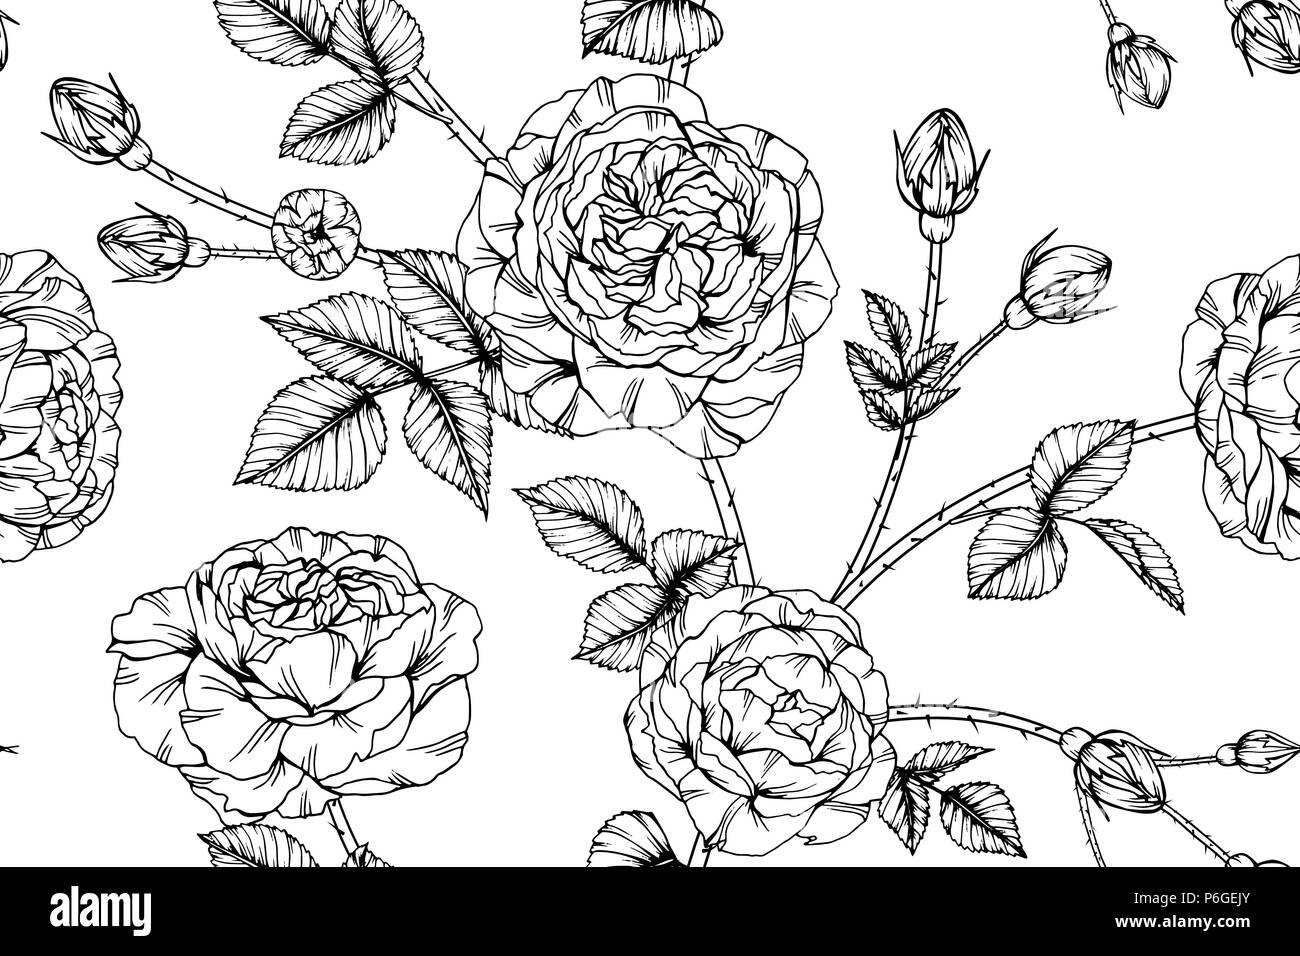 Buy Black and White Rose Drawing Pen and Ink Sketch Flowers Online in India   Etsy